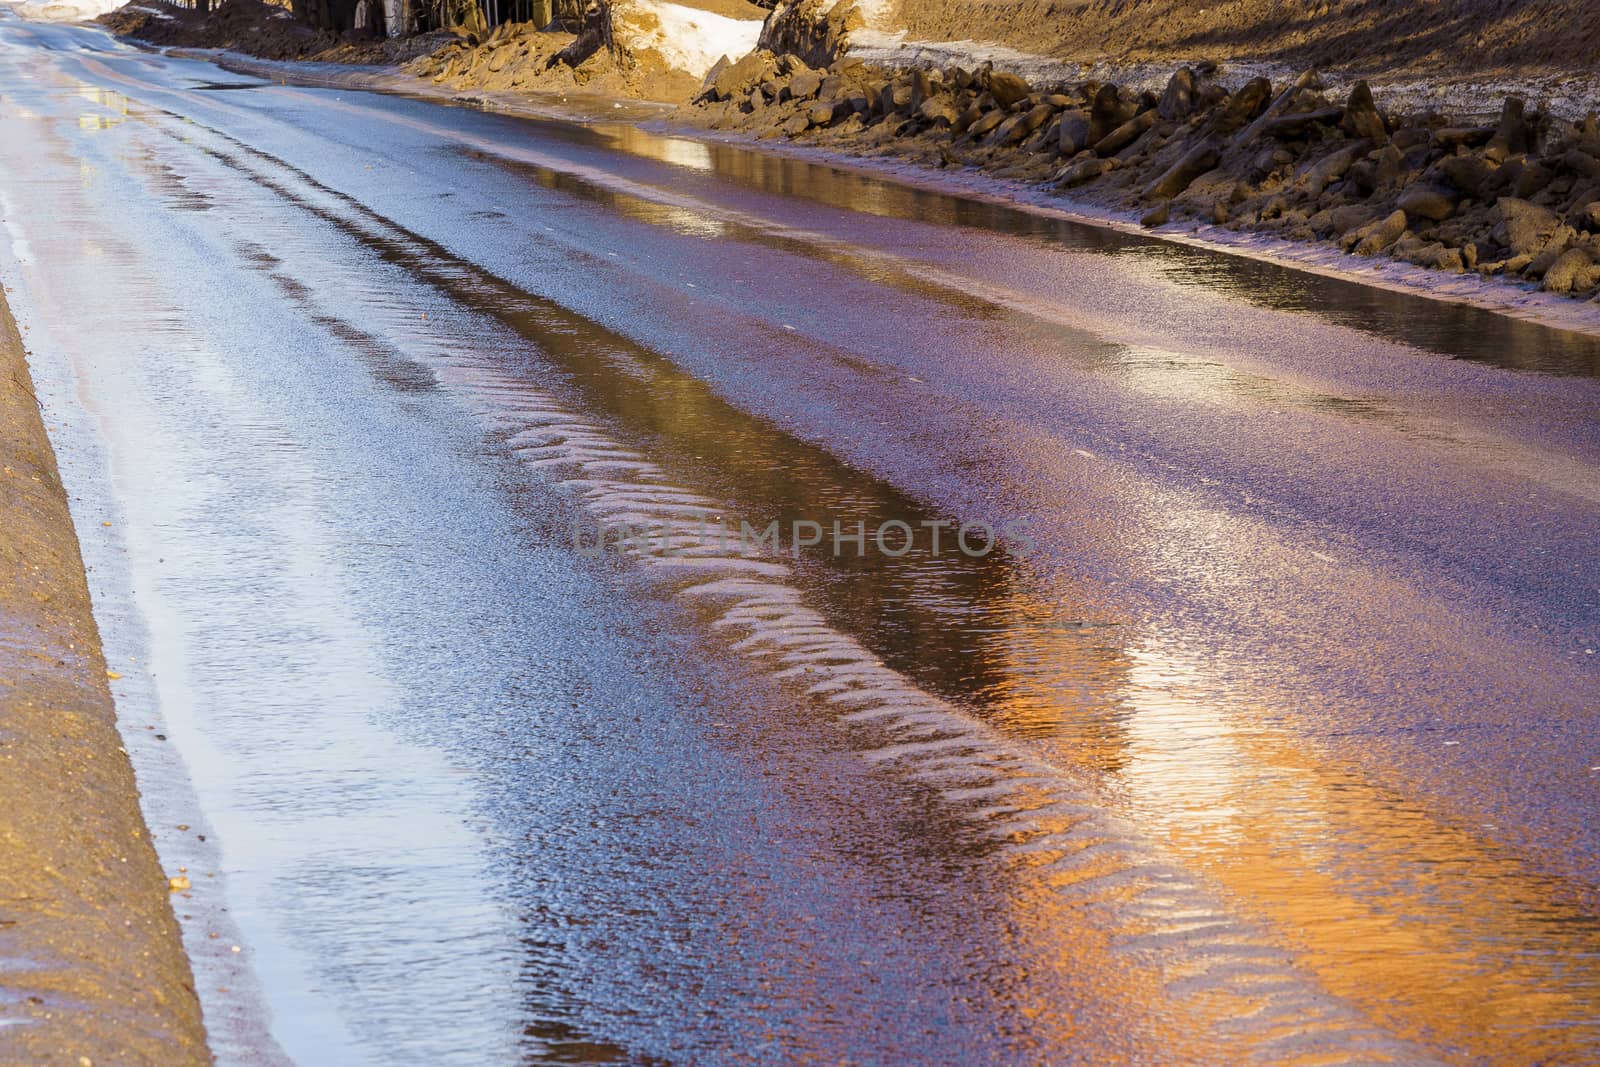 asphalt road in winter, with melting snow on the sides of the road and water